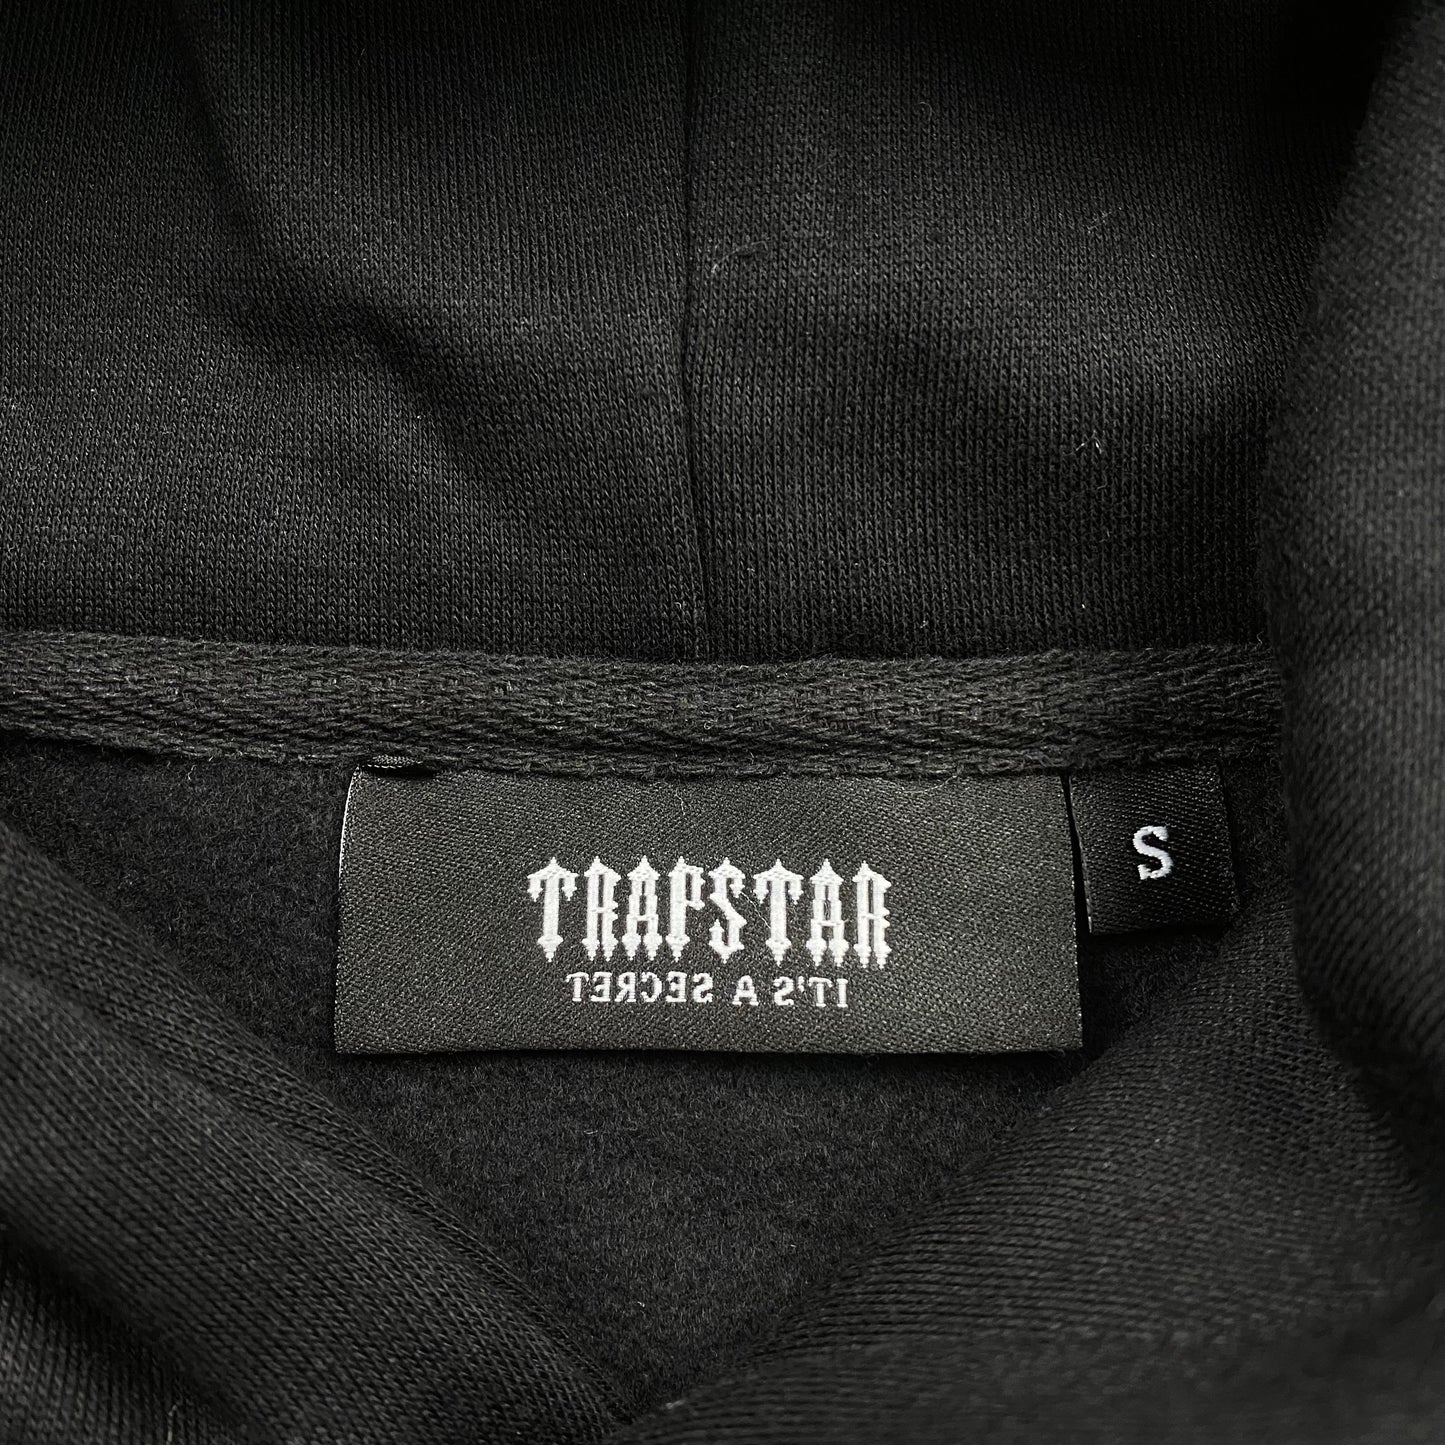 Trapstar Hoodie and Pants - 1